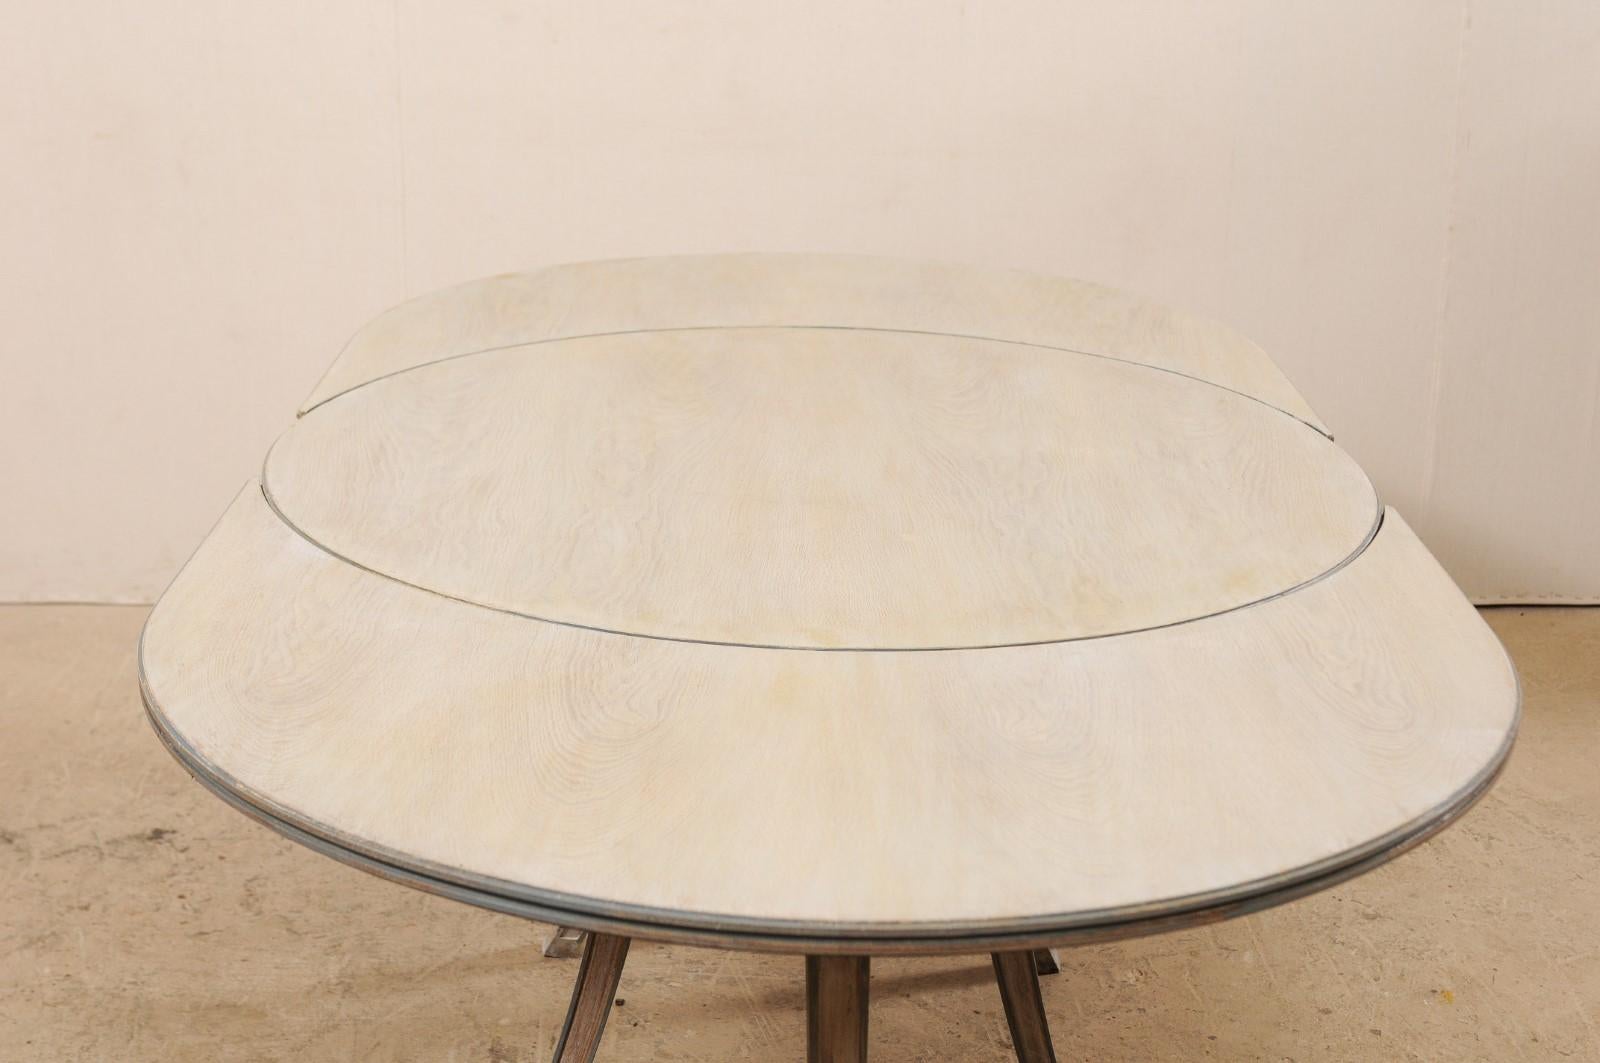 20th Century French Mid-century Modern Dining or Center Table, Transitions from Oval to Round